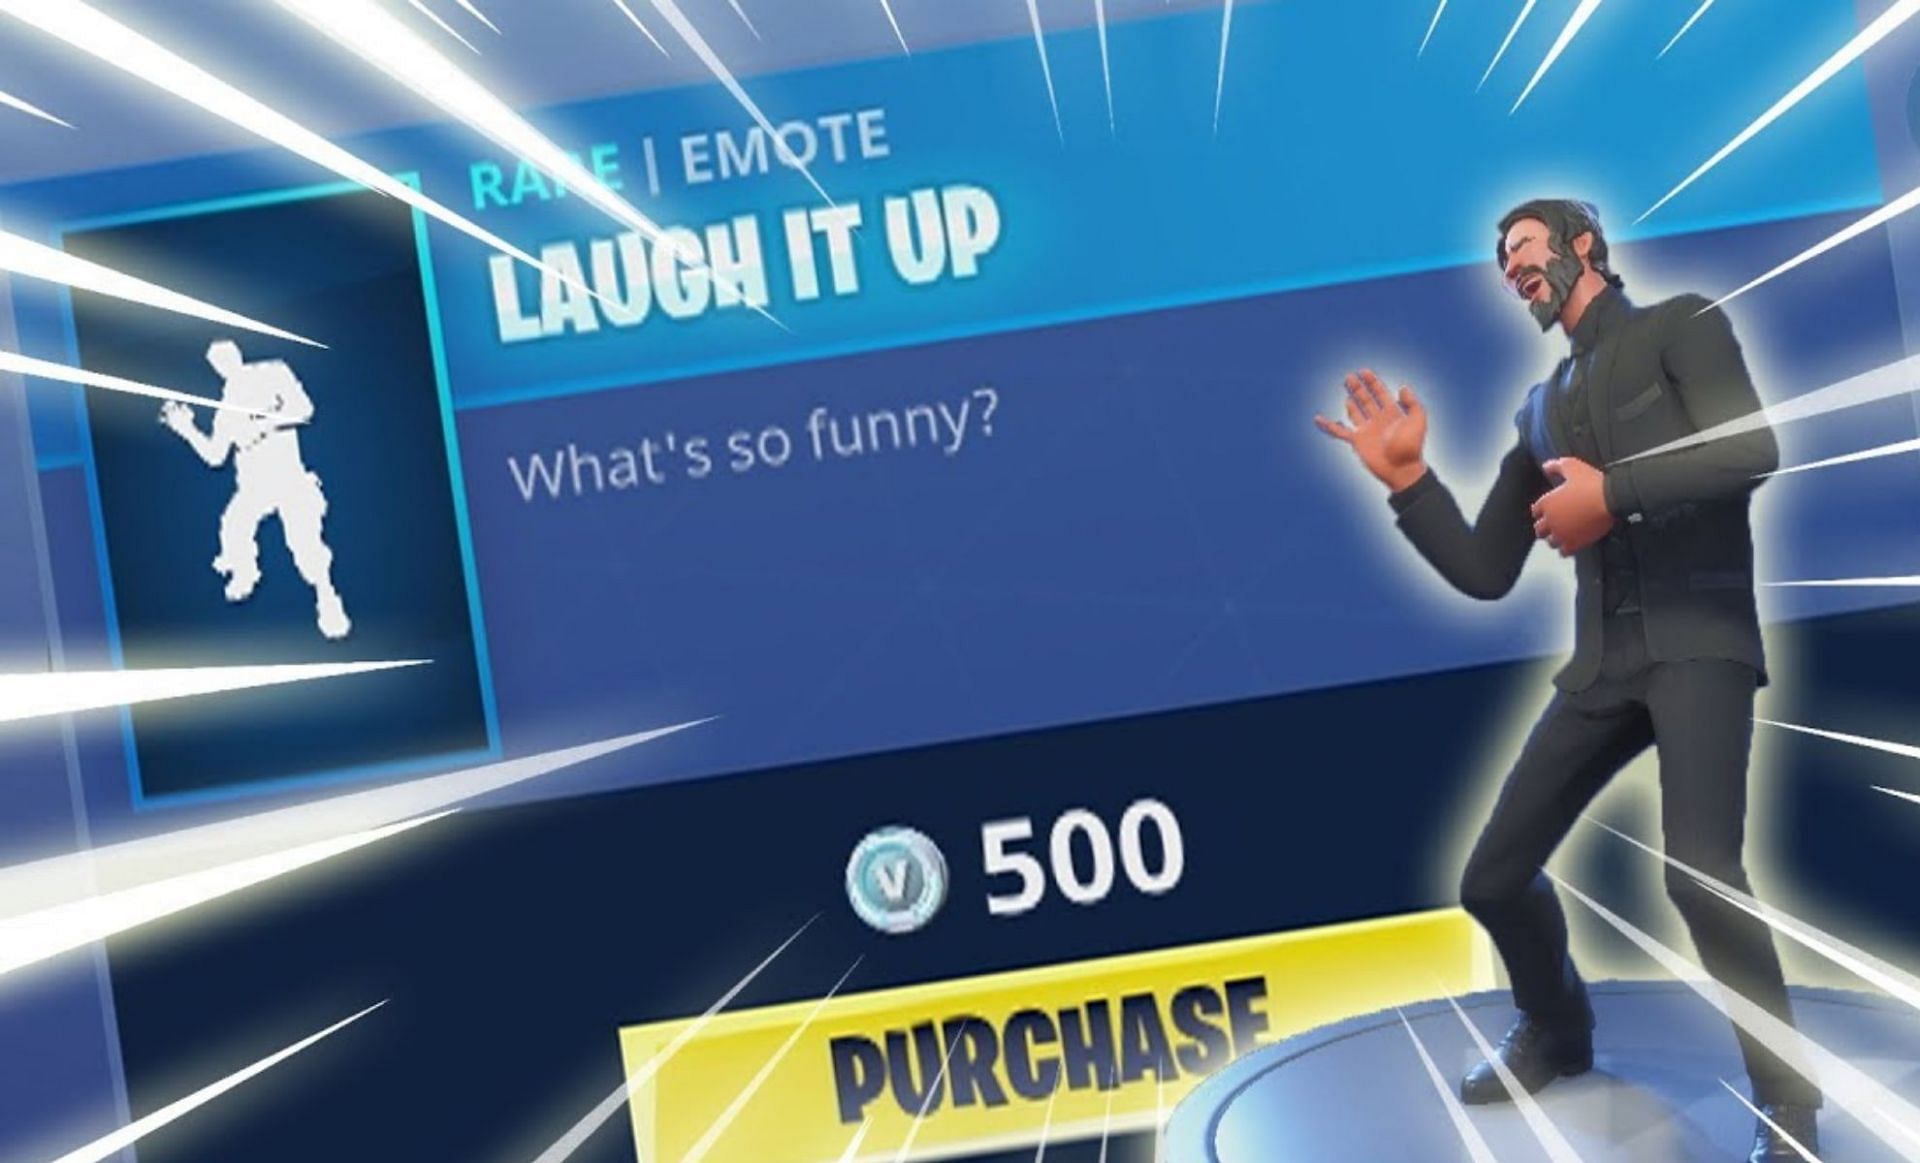 The &#039;Laugh It Up&#039; emote is considered  quite toxic (Image via Totej/YouTube)